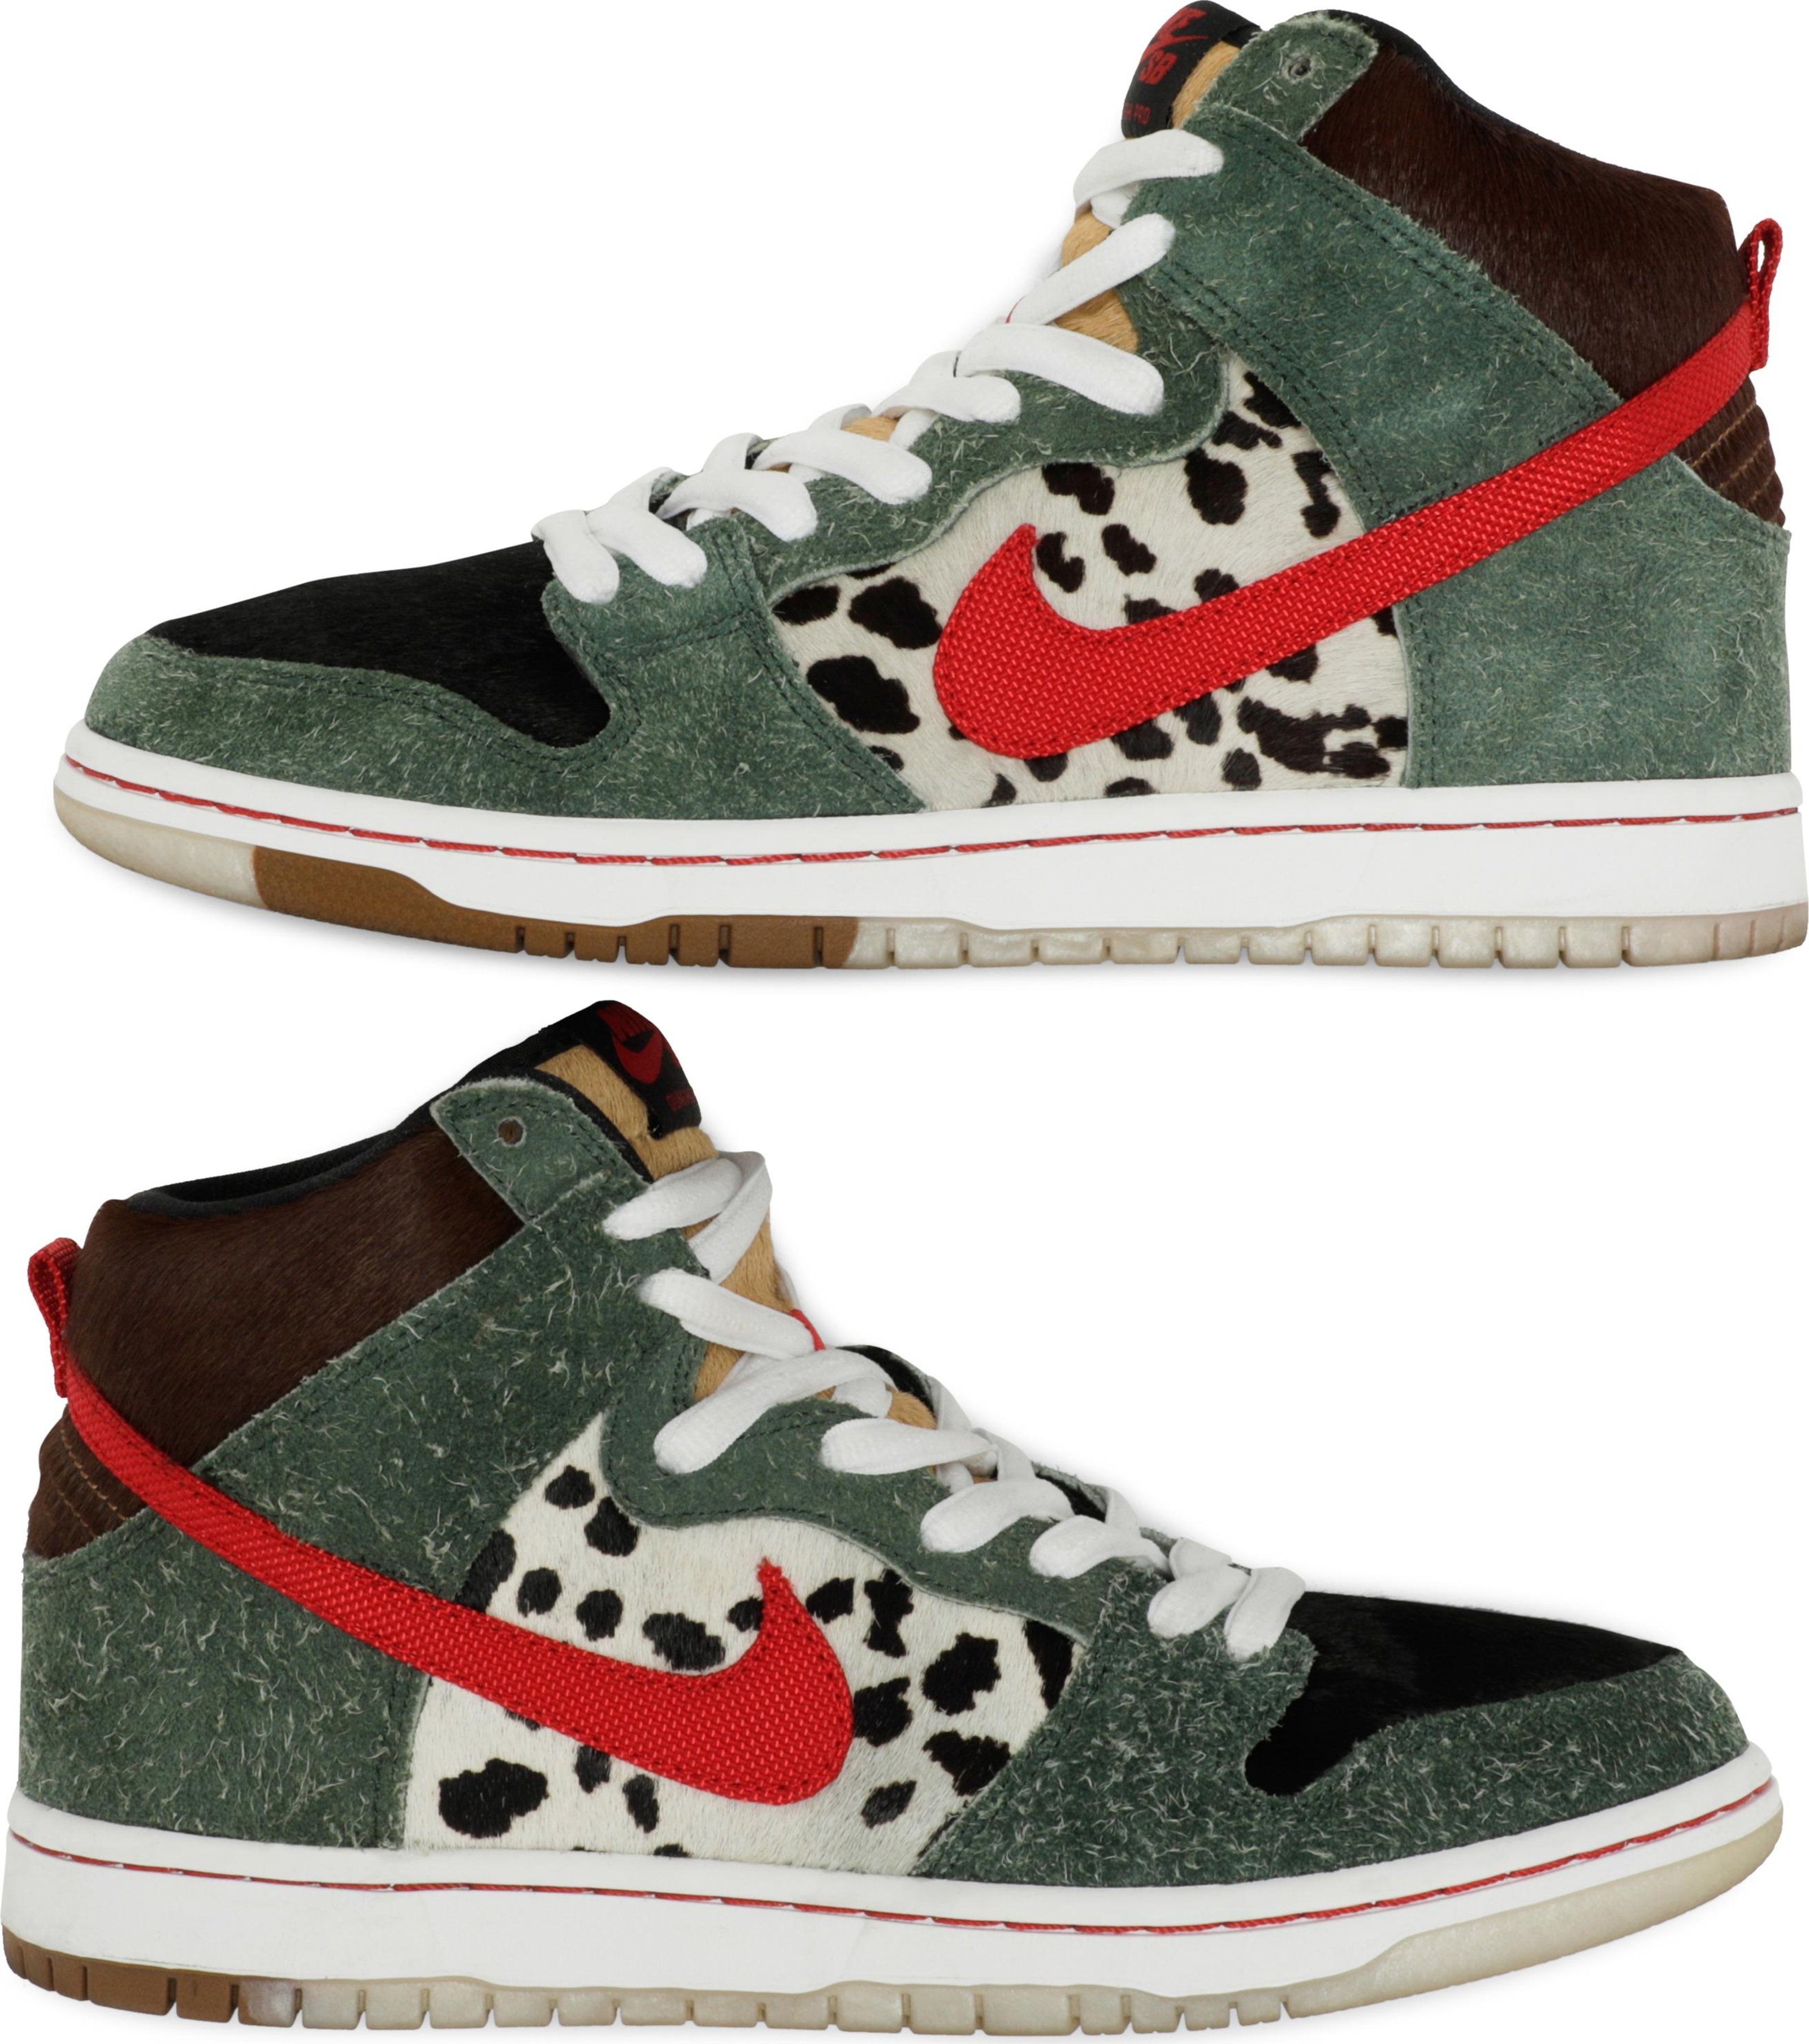 Buy Pre-Owned Dunk High SB 'Walk The Dog', From the Closet of Ama Lou ...